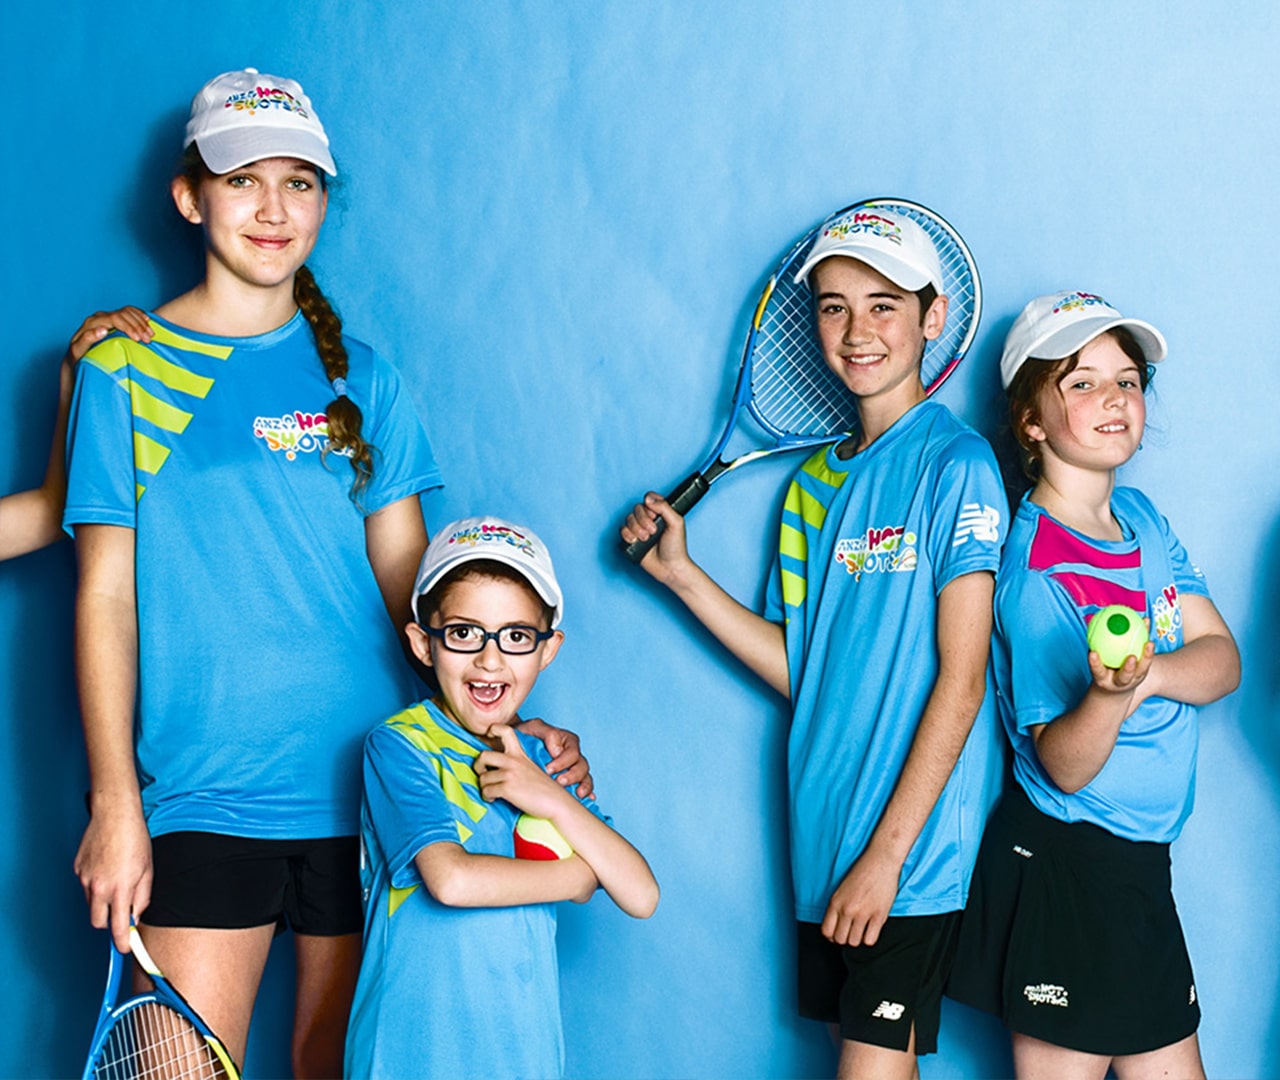 Four children, smiling at the camera, dressed for tennis and holding their racquets or tennis balls